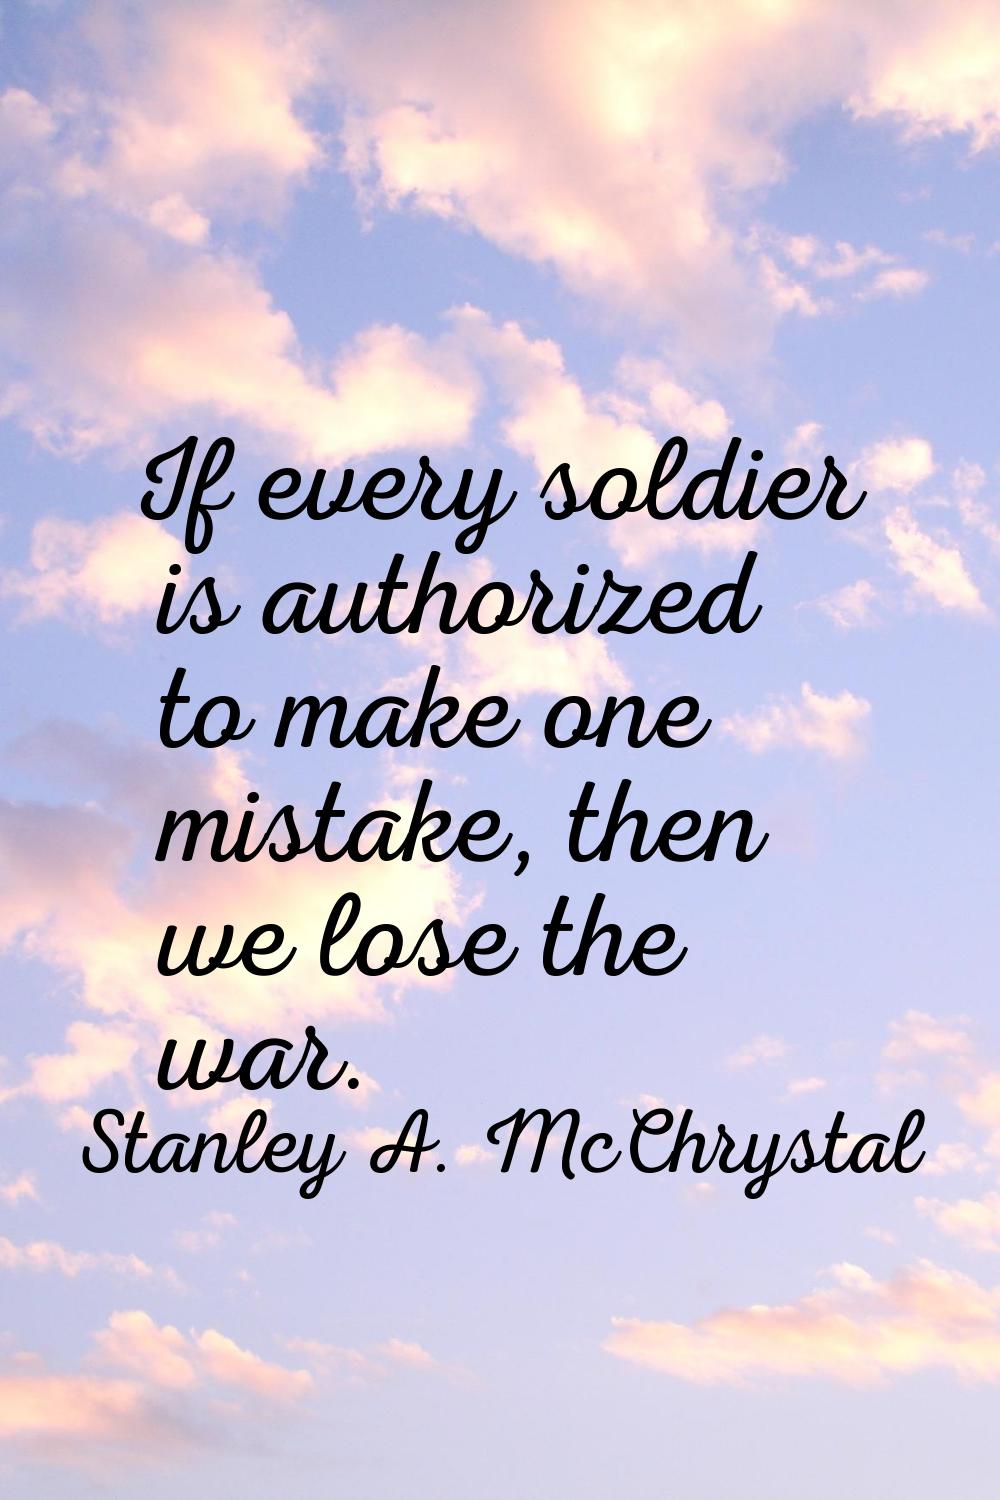 If every soldier is authorized to make one mistake, then we lose the war.